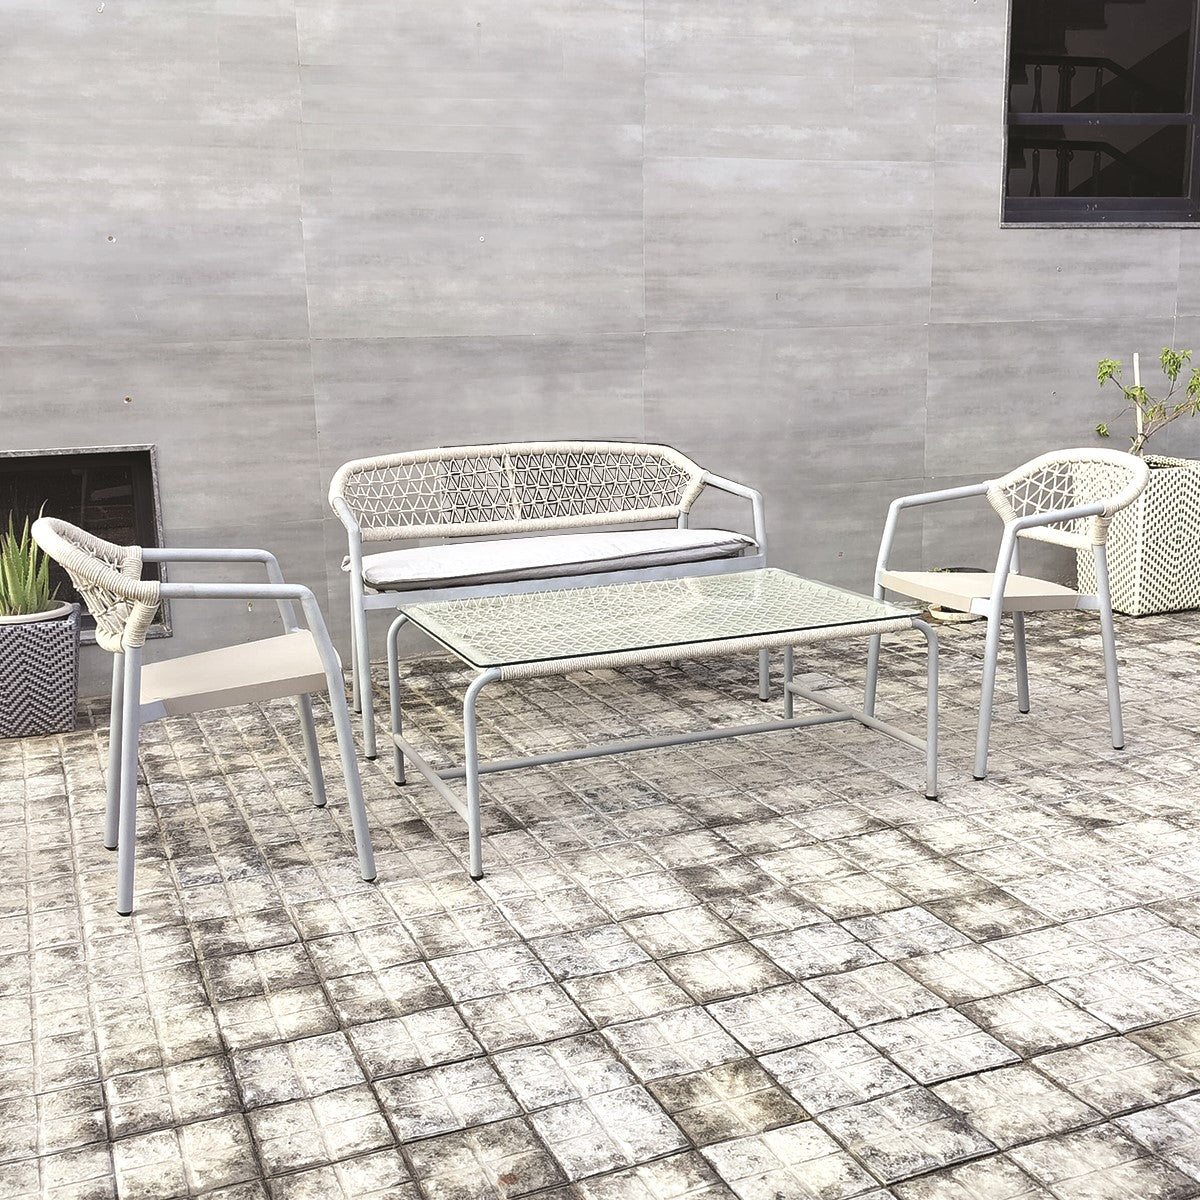 <b>VS 1111</b> <br>3+2 SEATER SOFA SET WITH TABLE IN ALUMINIUM FRAME AND ROPE